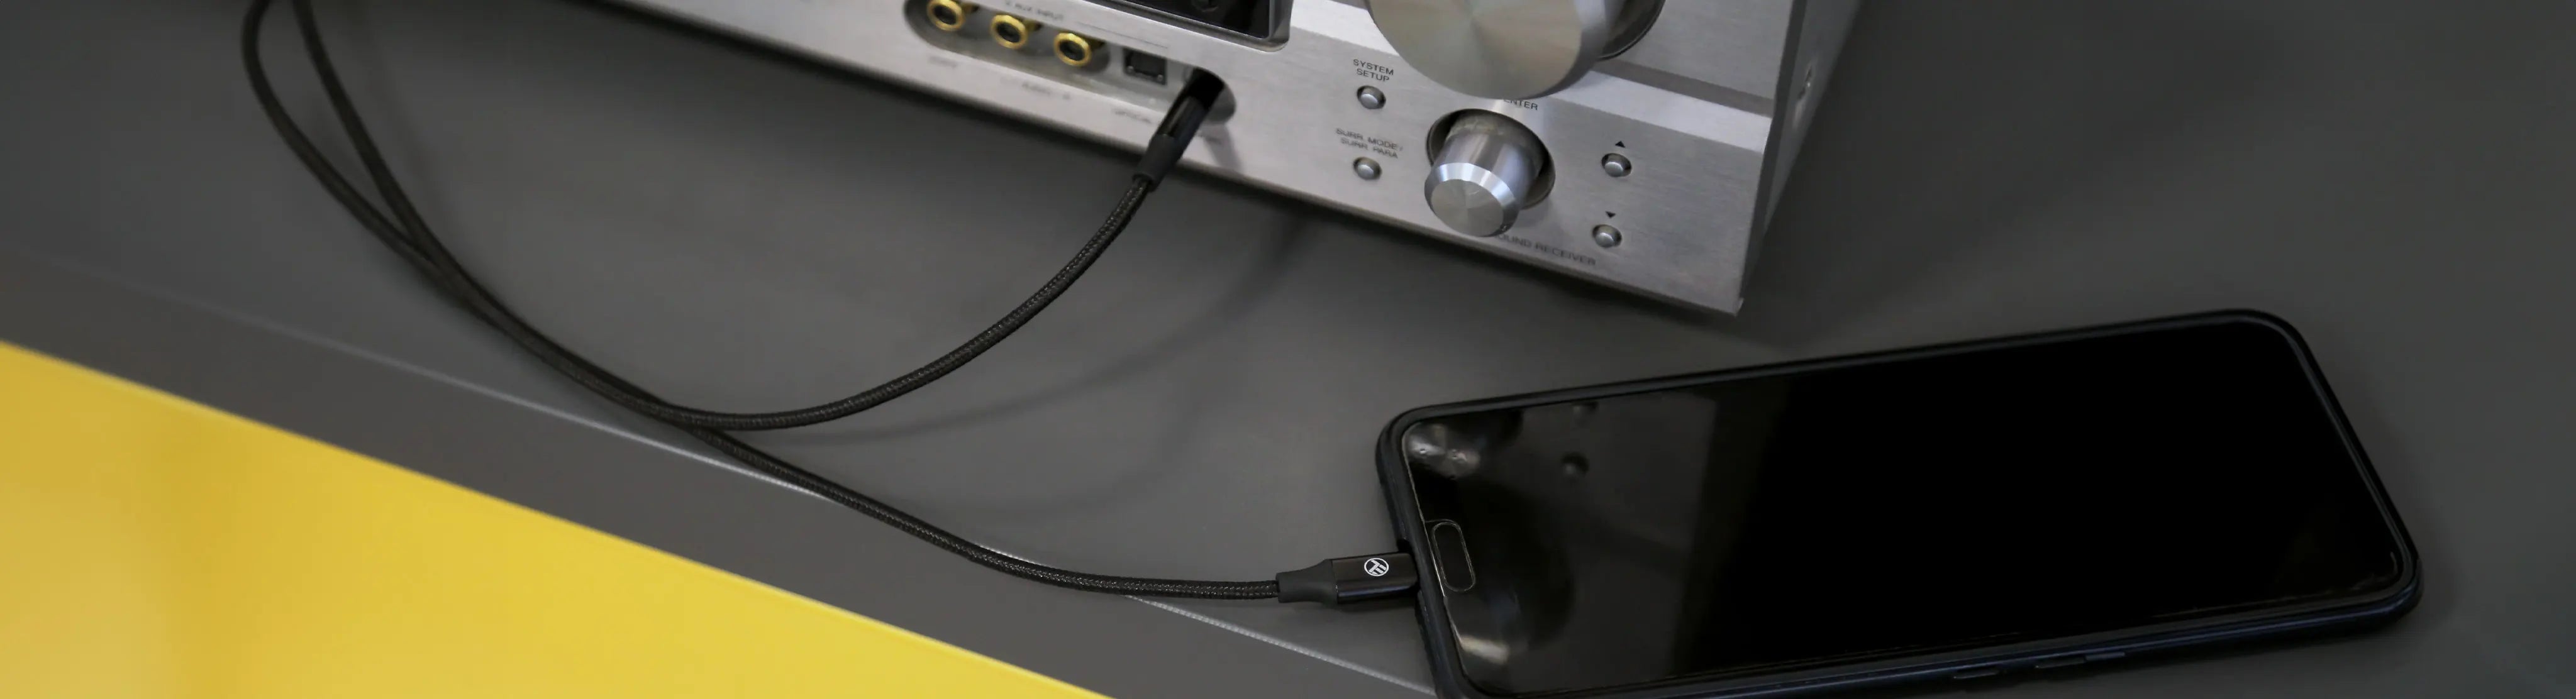 High-fidelity Tellur audio cables, featuring USB-C to 3.5mm connections and durable, gold-plated connectors.